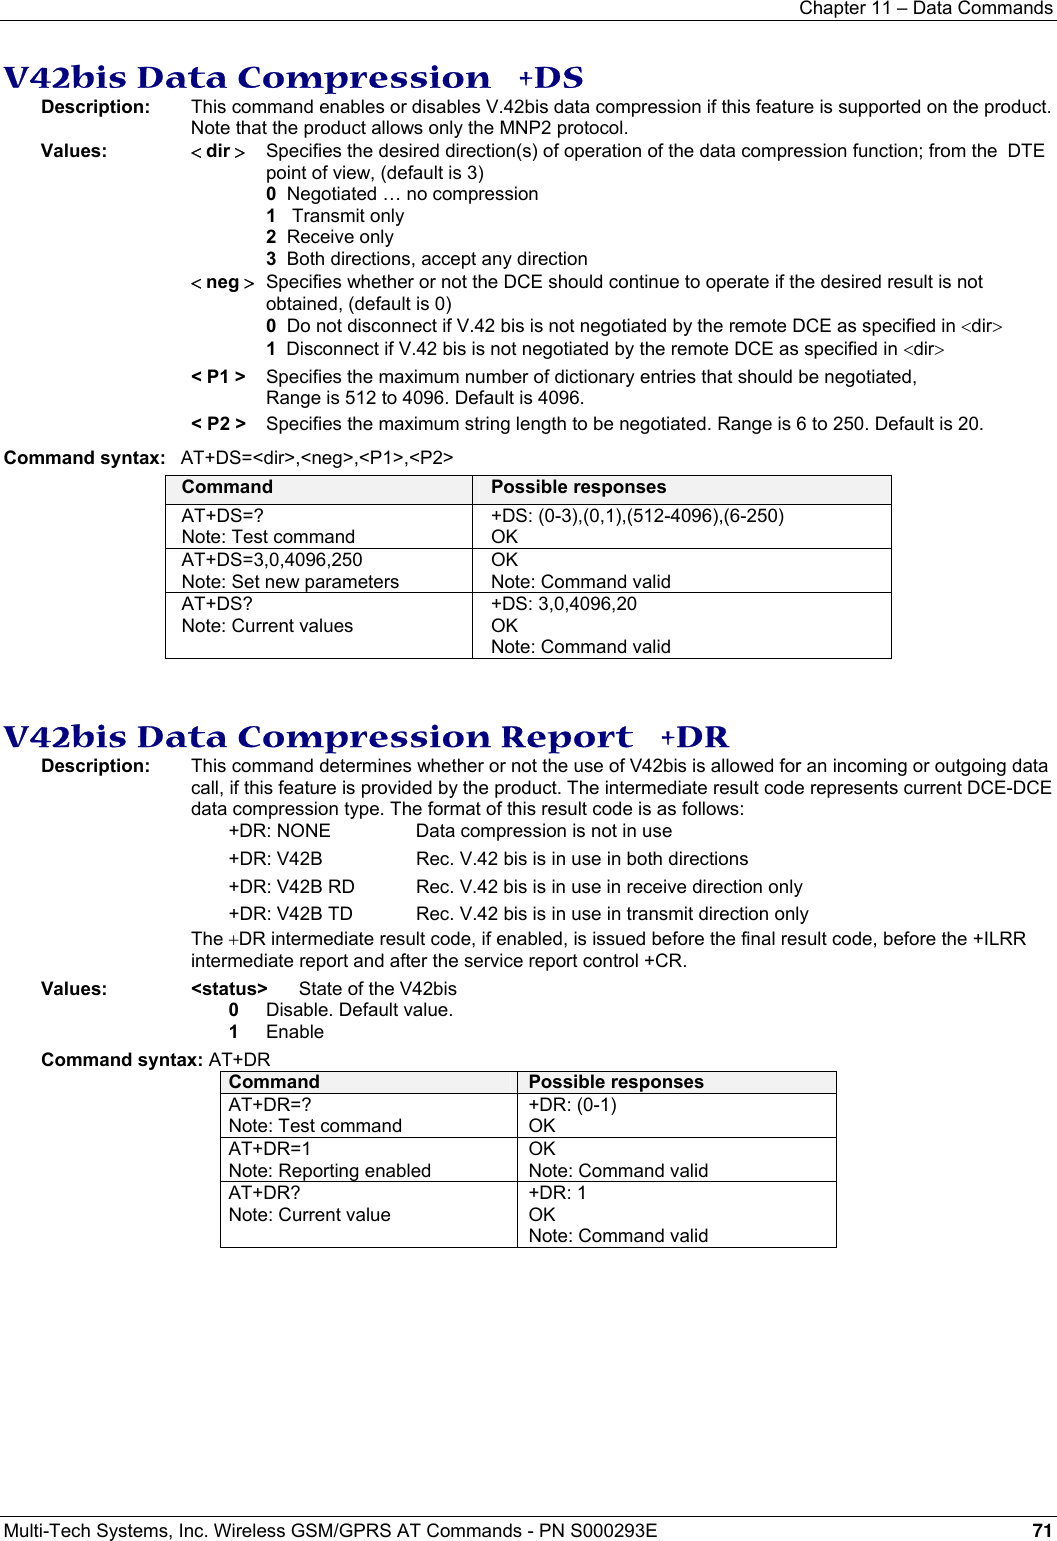 Chapter 11 – Data Commands  Multi-Tech Systems, Inc. Wireless GSM/GPRS AT Commands - PN S000293E 71  V42bis Data Compression   +DS Description:   This command enables or disables V.42bis data compression if this feature is supported on the product. Note that the product allows only the MNP2 protocol. Values:   &lt; dir &gt;   Specifies the desired direction(s) of operation of the data compression function; from the  DTE point of view, (default is 3) 0  Negotiated … no compression 1   Transmit only 2  Receive only 3  Both directions, accept any direction &lt; neg &gt;  Specifies whether or not the DCE should continue to operate if the desired result is not obtained, (default is 0) 0  Do not disconnect if V.42 bis is not negotiated by the remote DCE as specified in &lt;dir&gt; 1  Disconnect if V.42 bis is not negotiated by the remote DCE as specified in &lt;dir&gt; &lt; P1 &gt;   Specifies the maximum number of dictionary entries that should be negotiated,   Range is 512 to 4096. Default is 4096. &lt; P2 &gt;   Specifies the maximum string length to be negotiated. Range is 6 to 250. Default is 20. Command syntax:  AT+DS=&lt;dir&gt;,&lt;neg&gt;,&lt;P1&gt;,&lt;P2&gt; Command  Possible responses AT+DS=? Note: Test command +DS: (0-3),(0,1),(512-4096),(6-250) OK AT+DS=3,0,4096,250 Note: Set new parameters OK Note: Command valid AT+DS? Note: Current values +DS: 3,0,4096,20 OK Note: Command valid   V42bis Data Compression Report   +DR Description:  This command determines whether or not the use of V42bis is allowed for an incoming or outgoing data call, if this feature is provided by the product. The intermediate result code represents current DCE-DCE data compression type. The format of this result code is as follows: +DR: NONE  Data compression is not in use +DR: V42B  Rec. V.42 bis is in use in both directions +DR: V42B RD  Rec. V.42 bis is in use in receive direction only +DR: V42B TD  Rec. V.42 bis is in use in transmit direction only The +DR intermediate result code, if enabled, is issued before the final result code, before the +ILRR intermediate report and after the service report control +CR. Values:   &lt;status&gt;  State of the V42bis 0  Disable. Default value. 1 Enable  Command syntax: AT+DR Command  Possible responses AT+DR=? Note: Test command +DR: (0-1)  OK AT+DR=1 Note: Reporting enabled OK Note: Command valid AT+DR? Note: Current value +DR: 1 OK Note: Command valid  